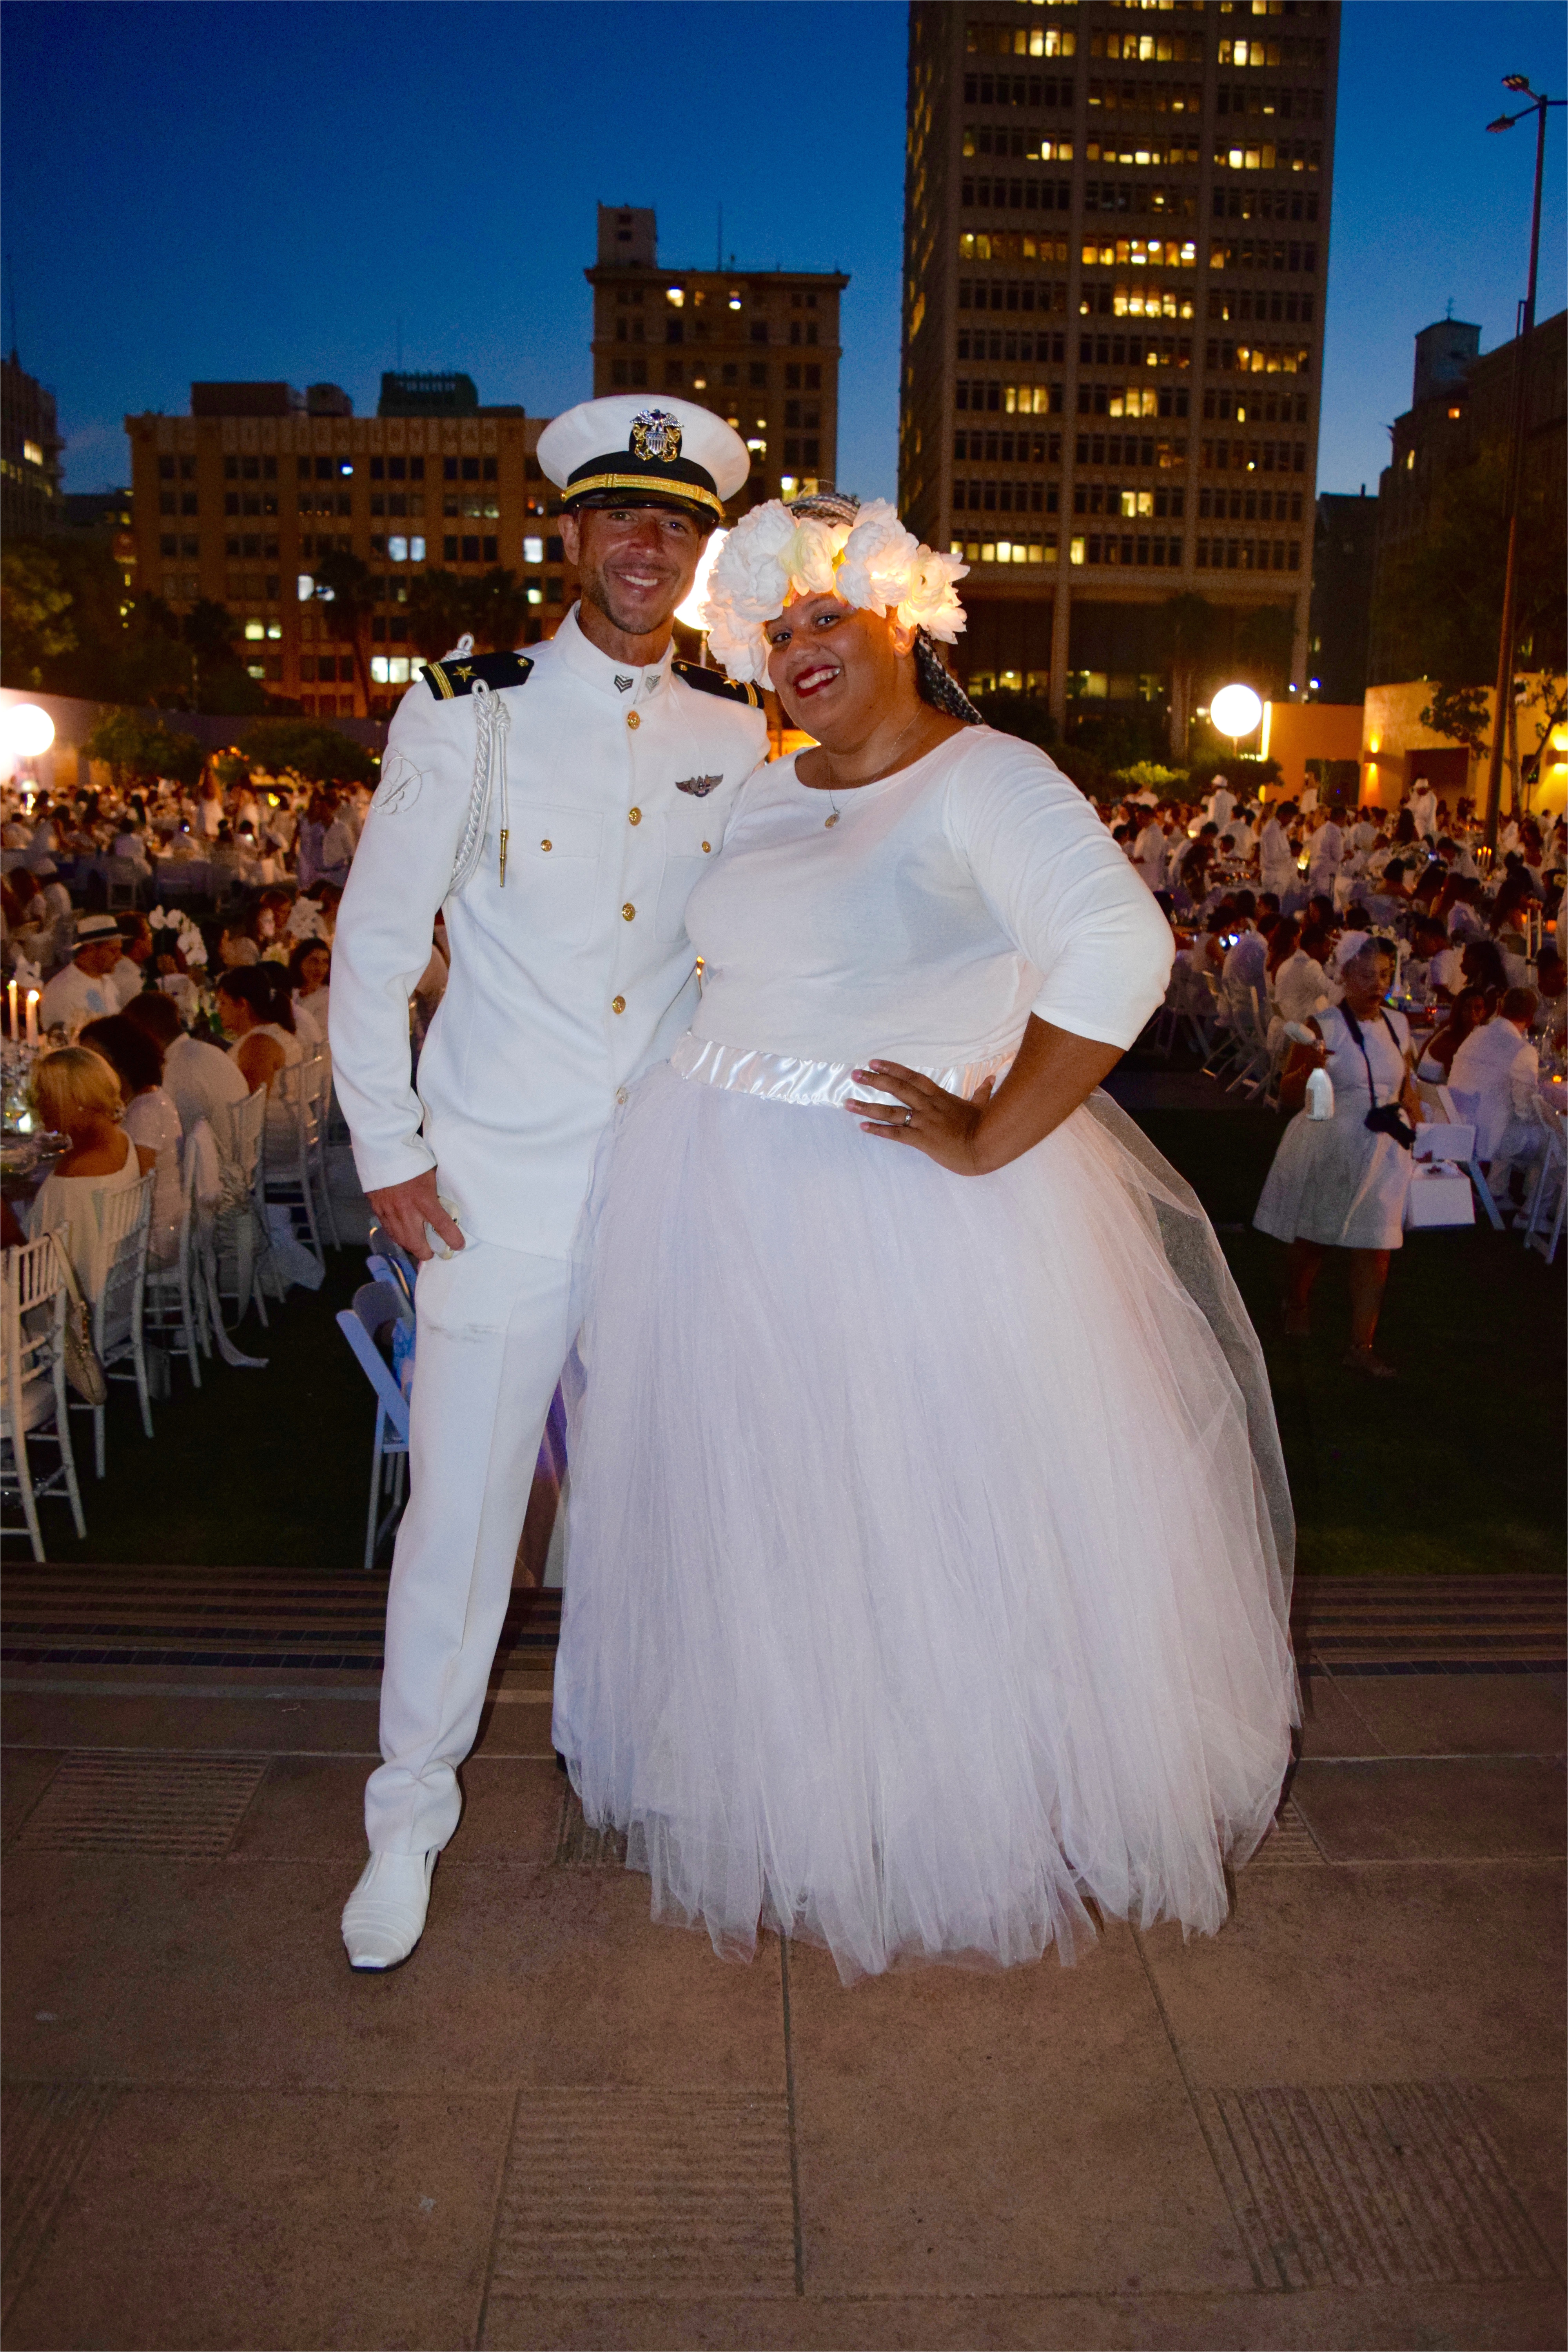 have you made new friends at the many le da ner en blanc events that you have attended